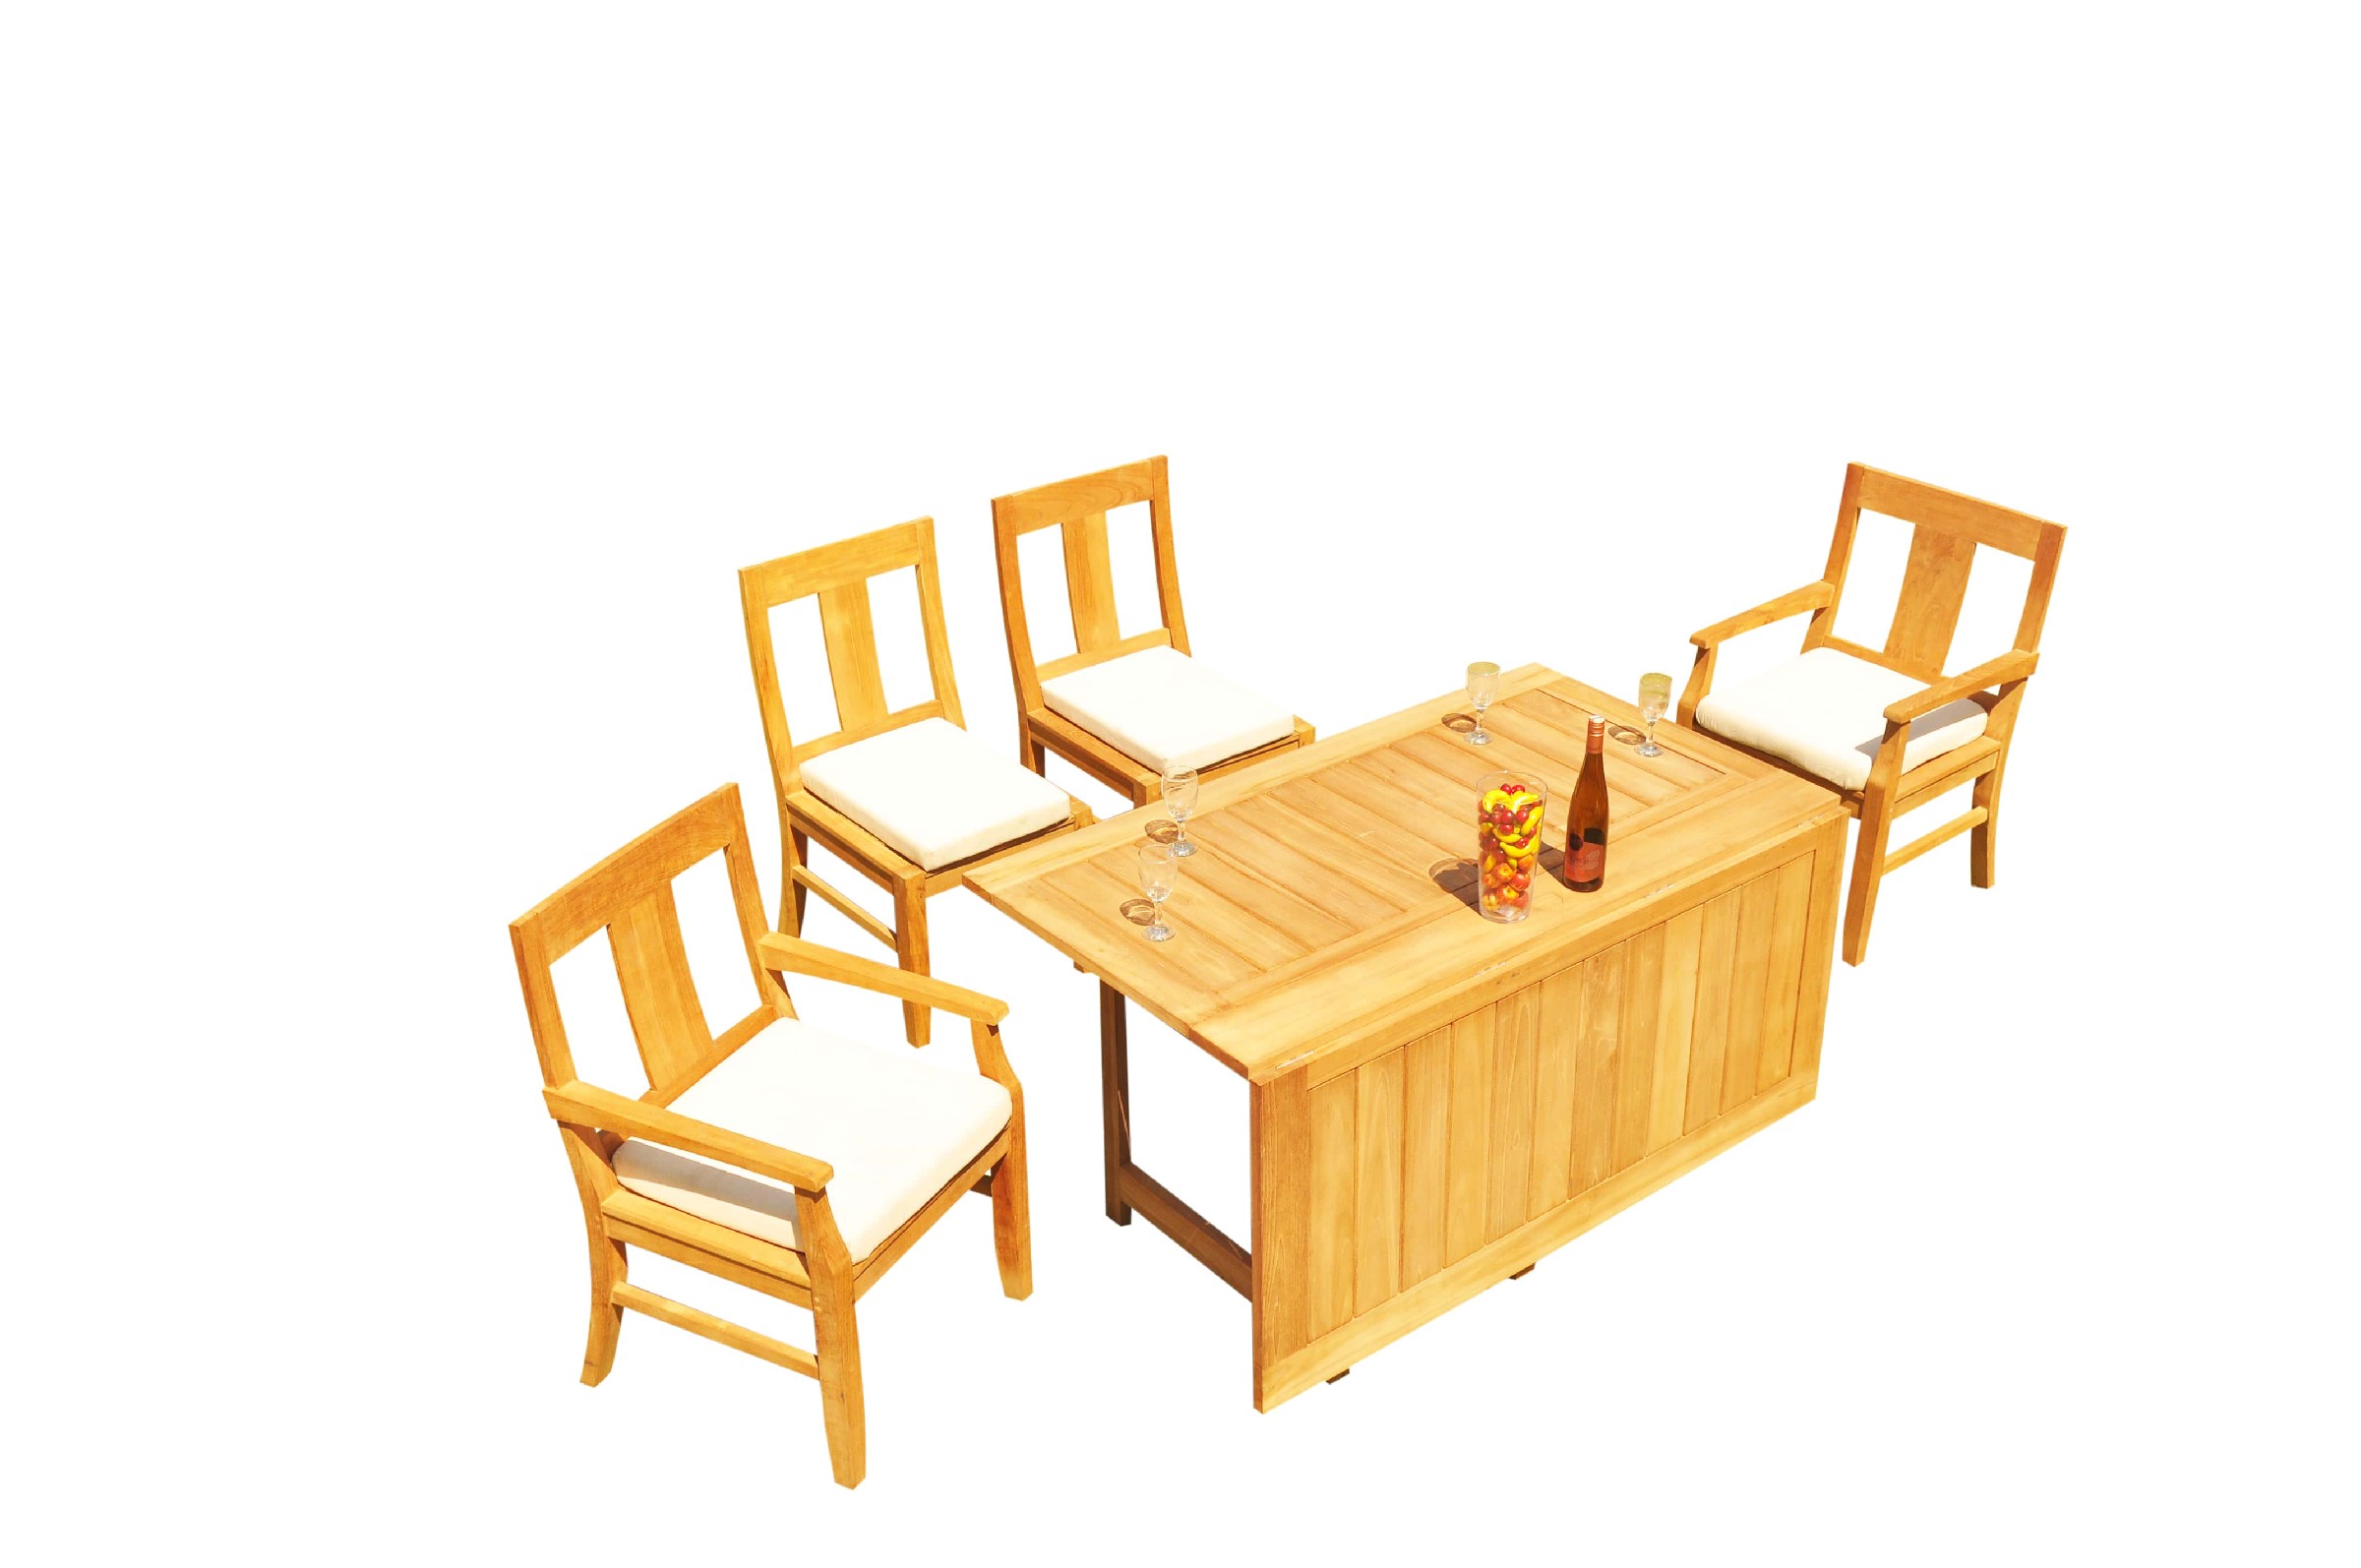 Grade-A Teak Dining Set: 4 Seater 5 Pc: 60" Square Rectangle Butterfly Table And 4 Osborne Chairs (2 Arm & 2 Armless Chairs) WholesaleTeak #51OS1405 - image 1 of 6